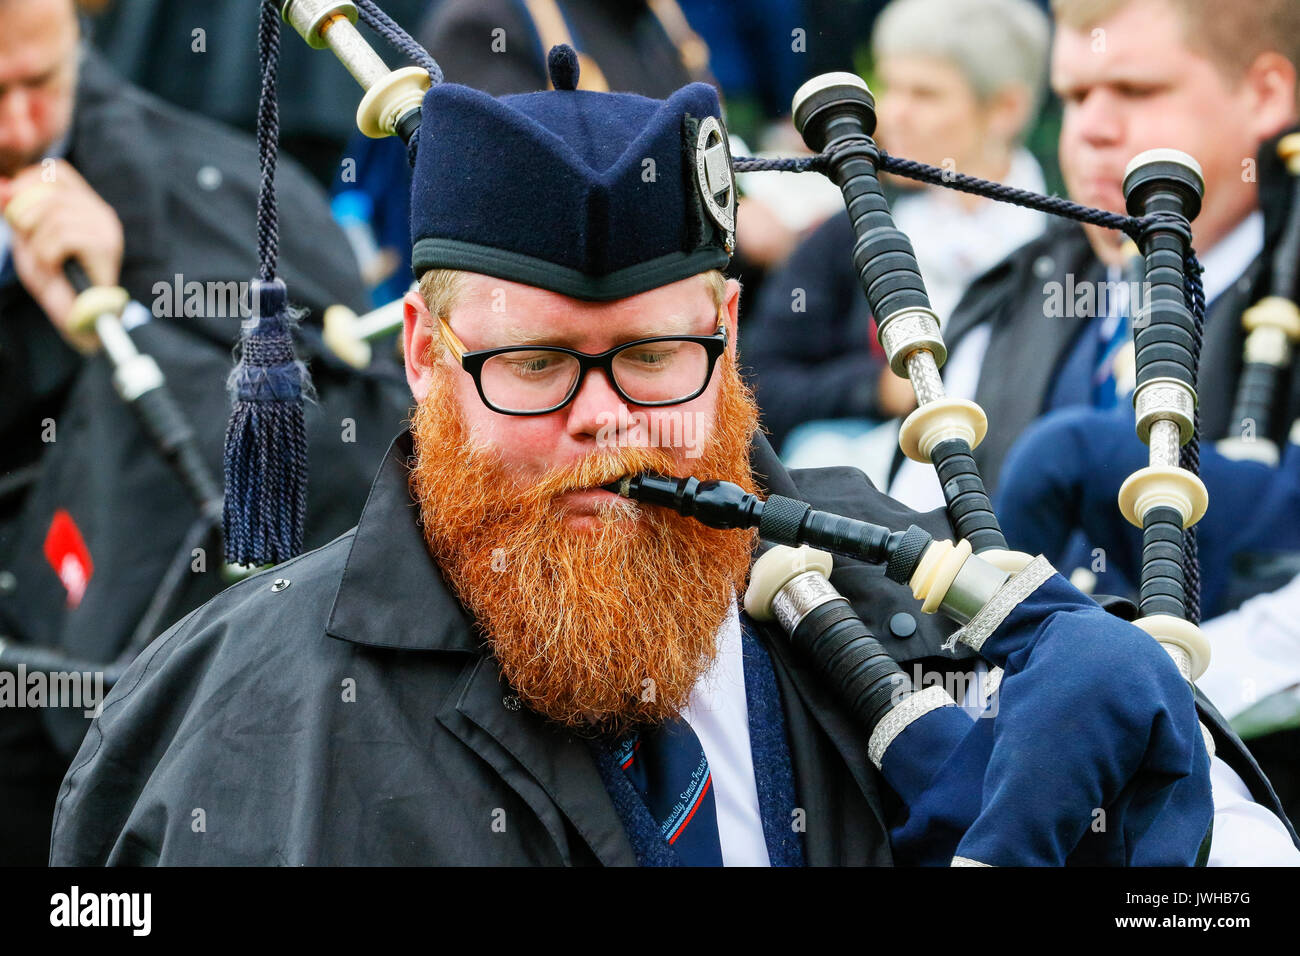 Glasgow, UK. 12th Aug, 2017. It was estimated that more than 10,000 spectators turned out to watch the final day of "Piping Live" and the World Pipe Band Championships, an Internationally renowned competition, take place in Glasgow Green as the finale to a week of entertainment and free concerts that have taken place around Glasgow city centre. Despite the occasional heavy rain shower, play continued and spirits weren't dampened. Credit: Findlay/Alamy Live News Stock Photo